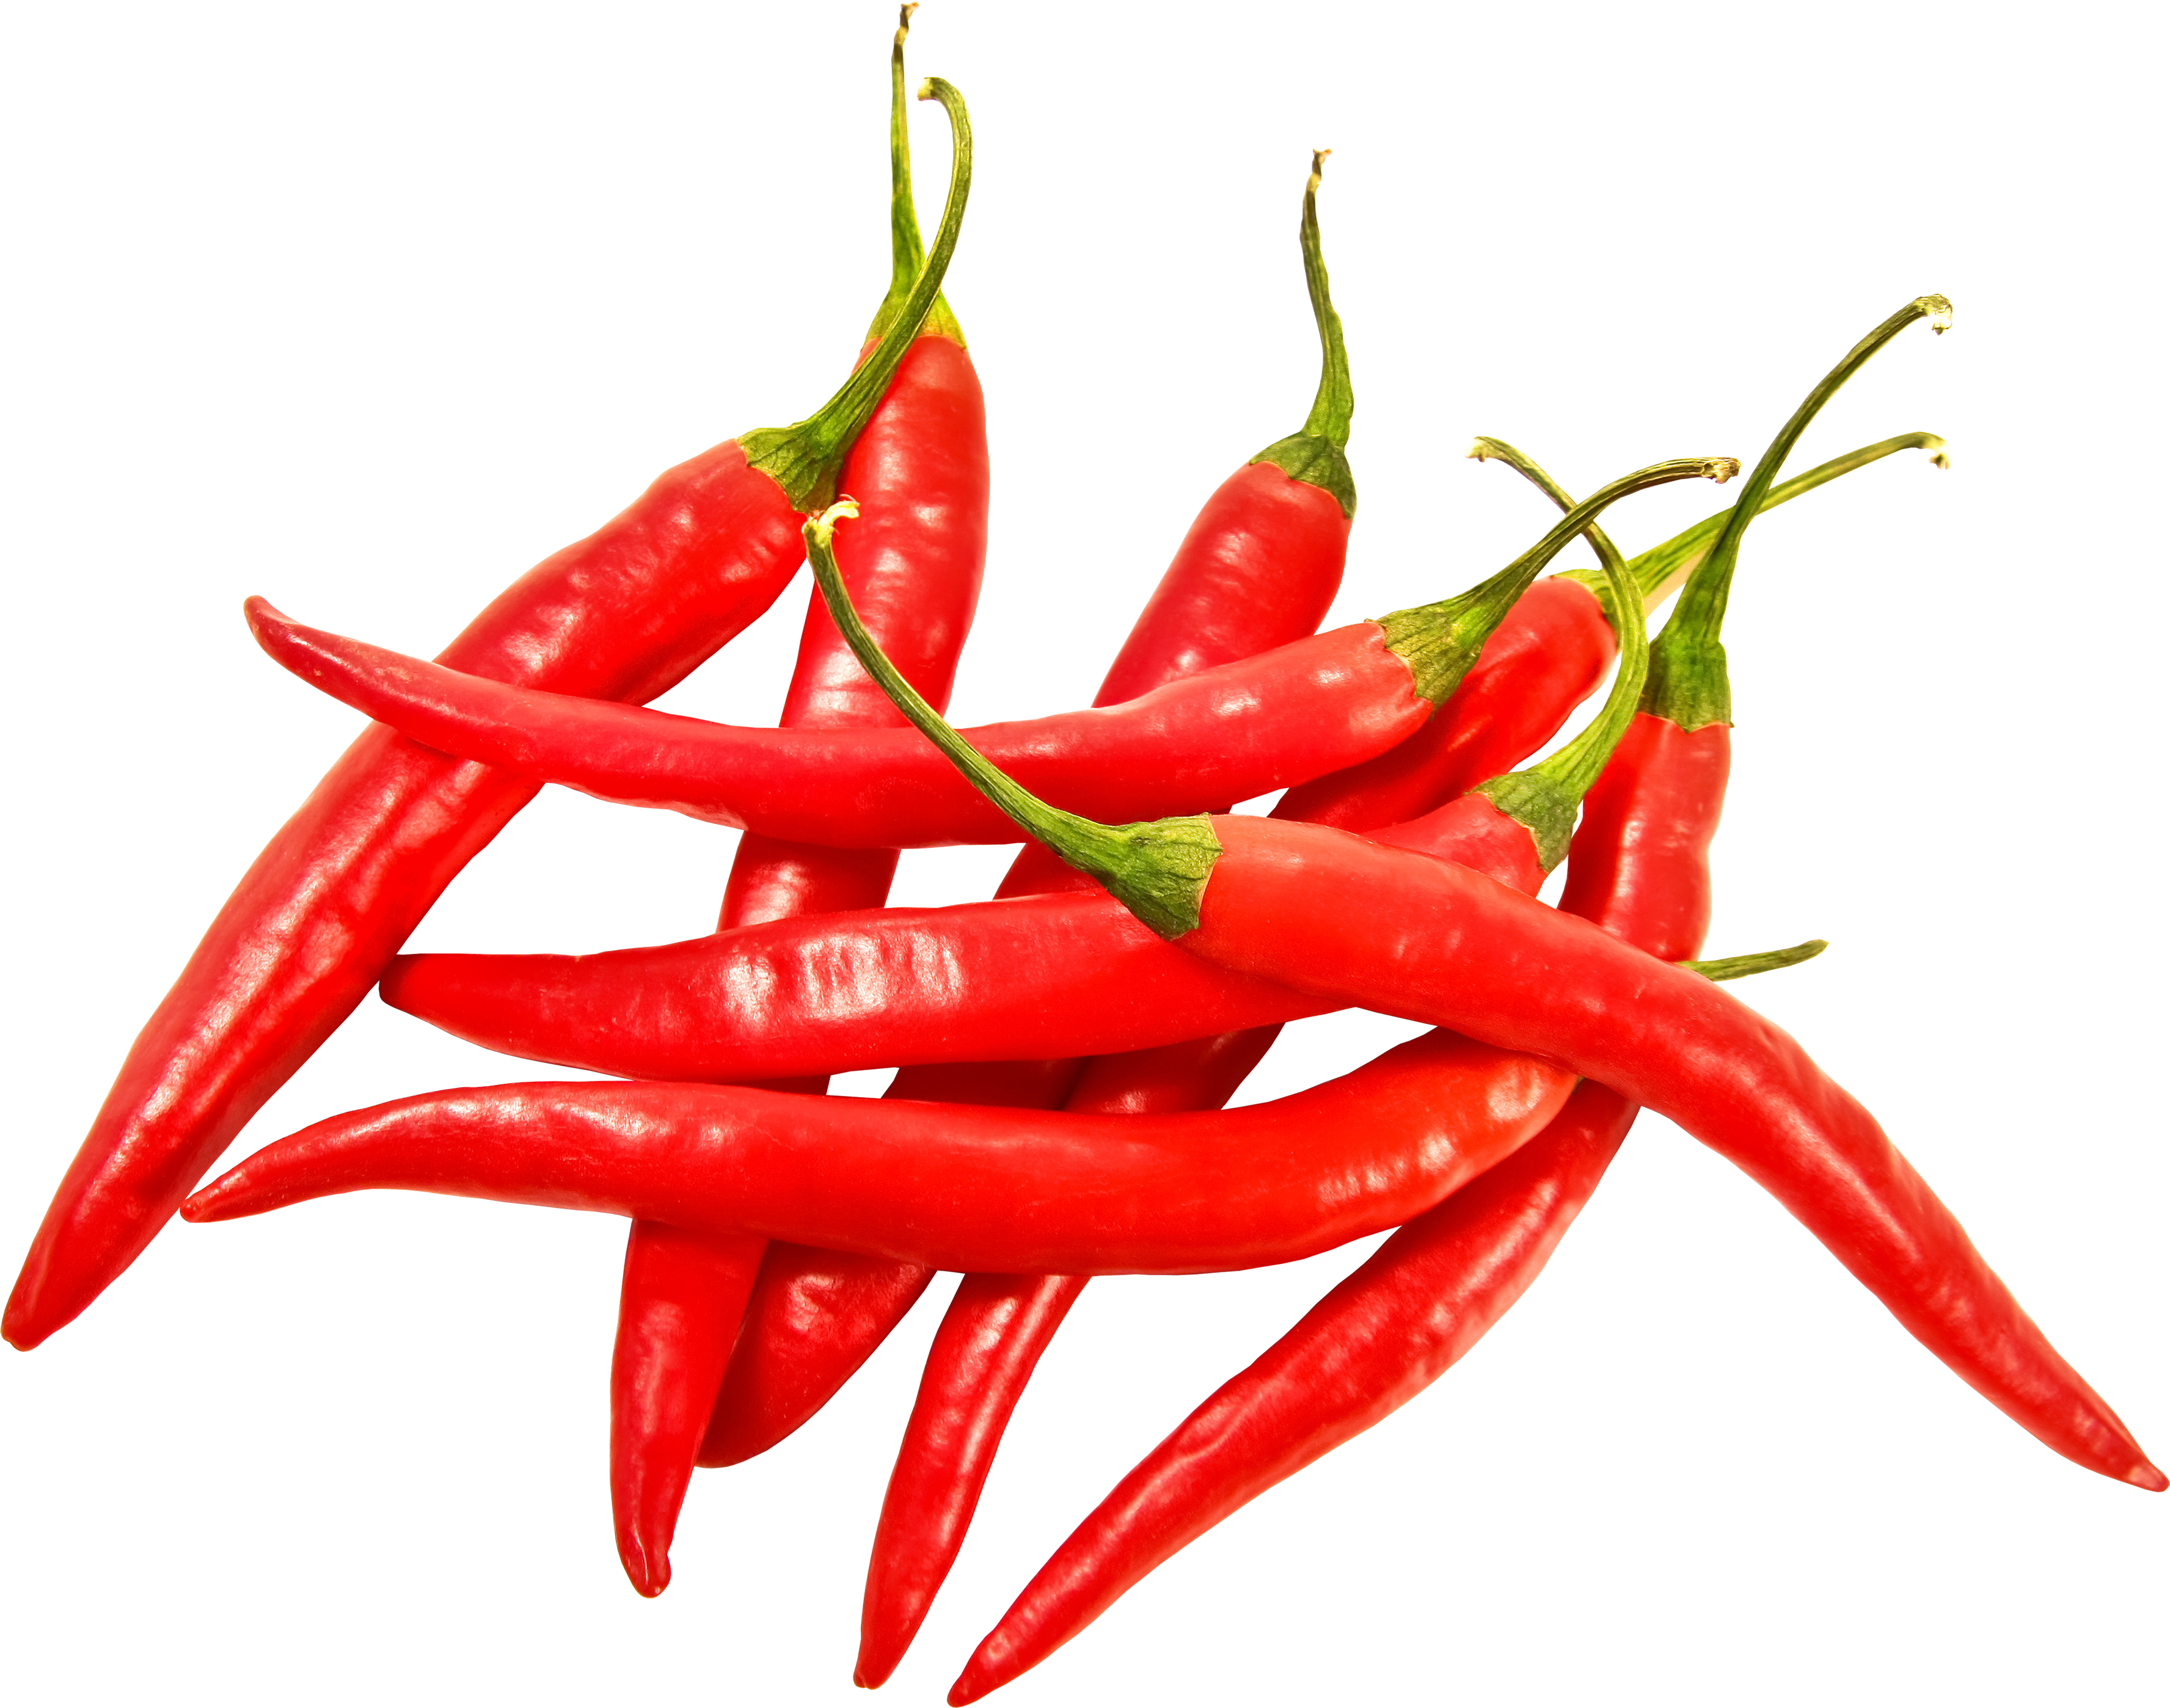 Red chili png image. Pepper clipart spice